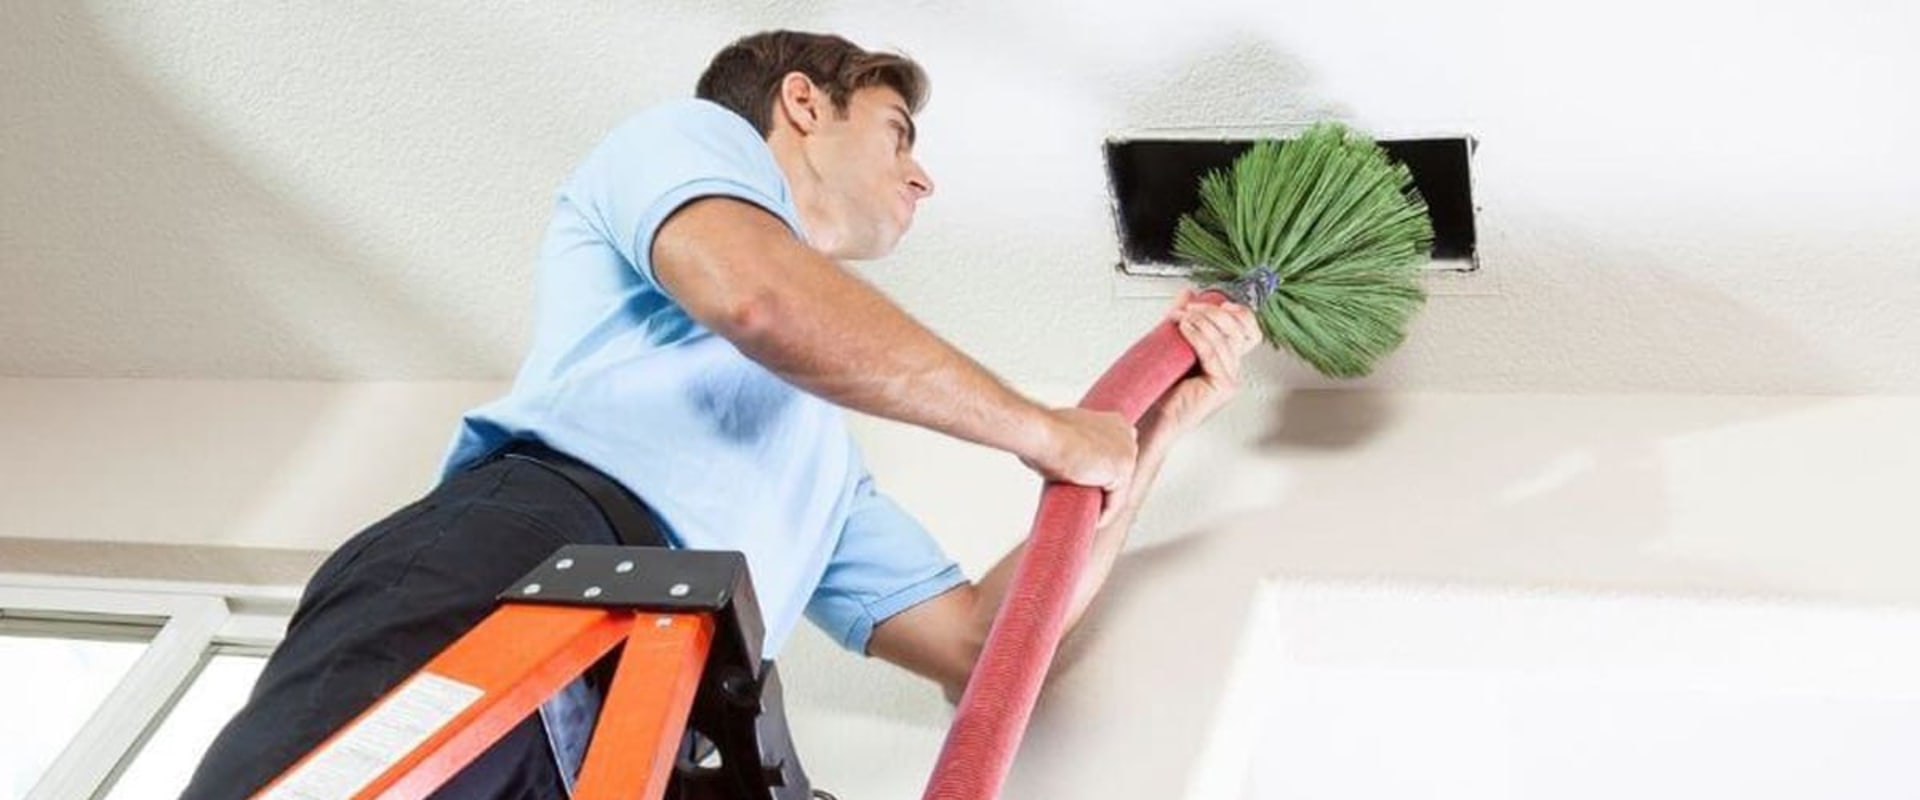 Do You Need a License to Clean Air Ducts in Colorado? - An Expert's Guide